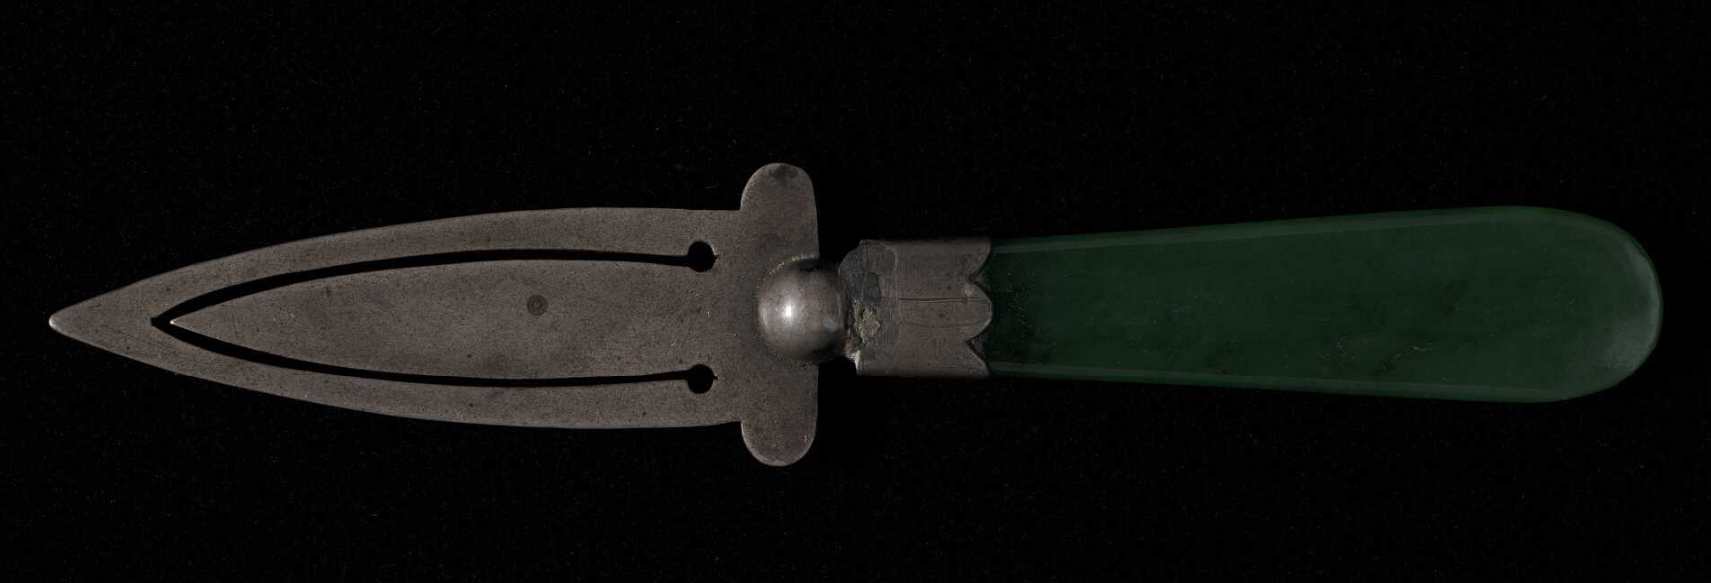 Deep green pounamu blade and silver handle bookmark that doubles as a letter opener